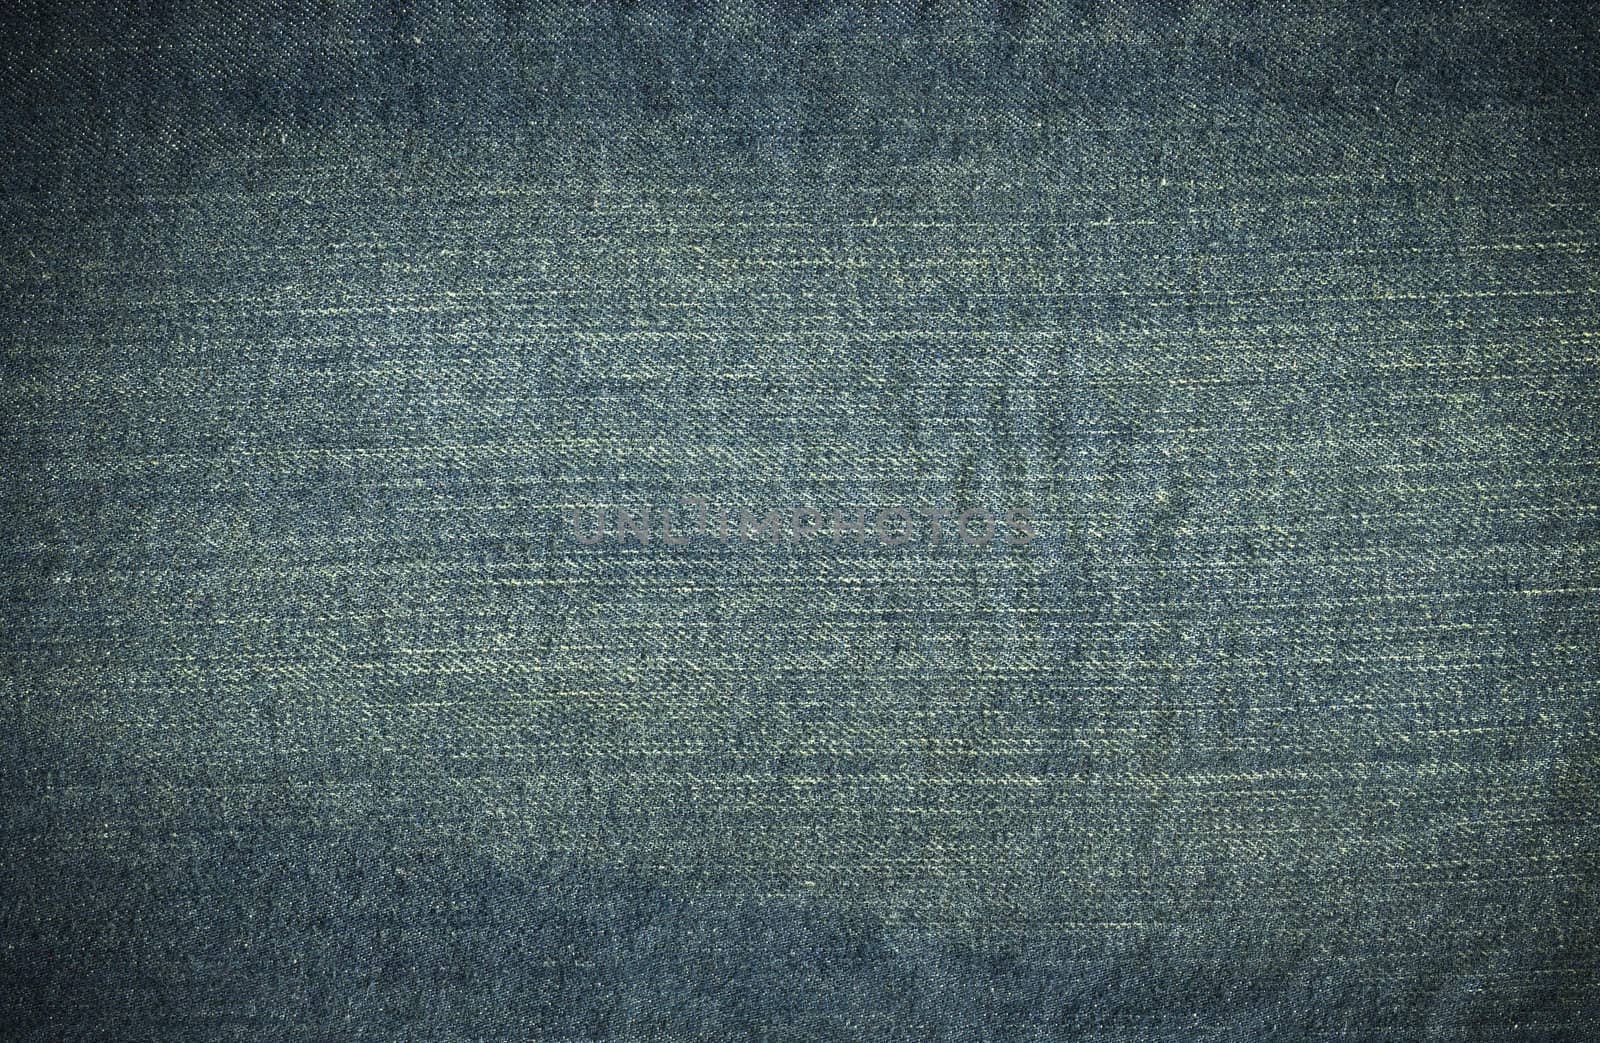 High resolution scan of jeans texture